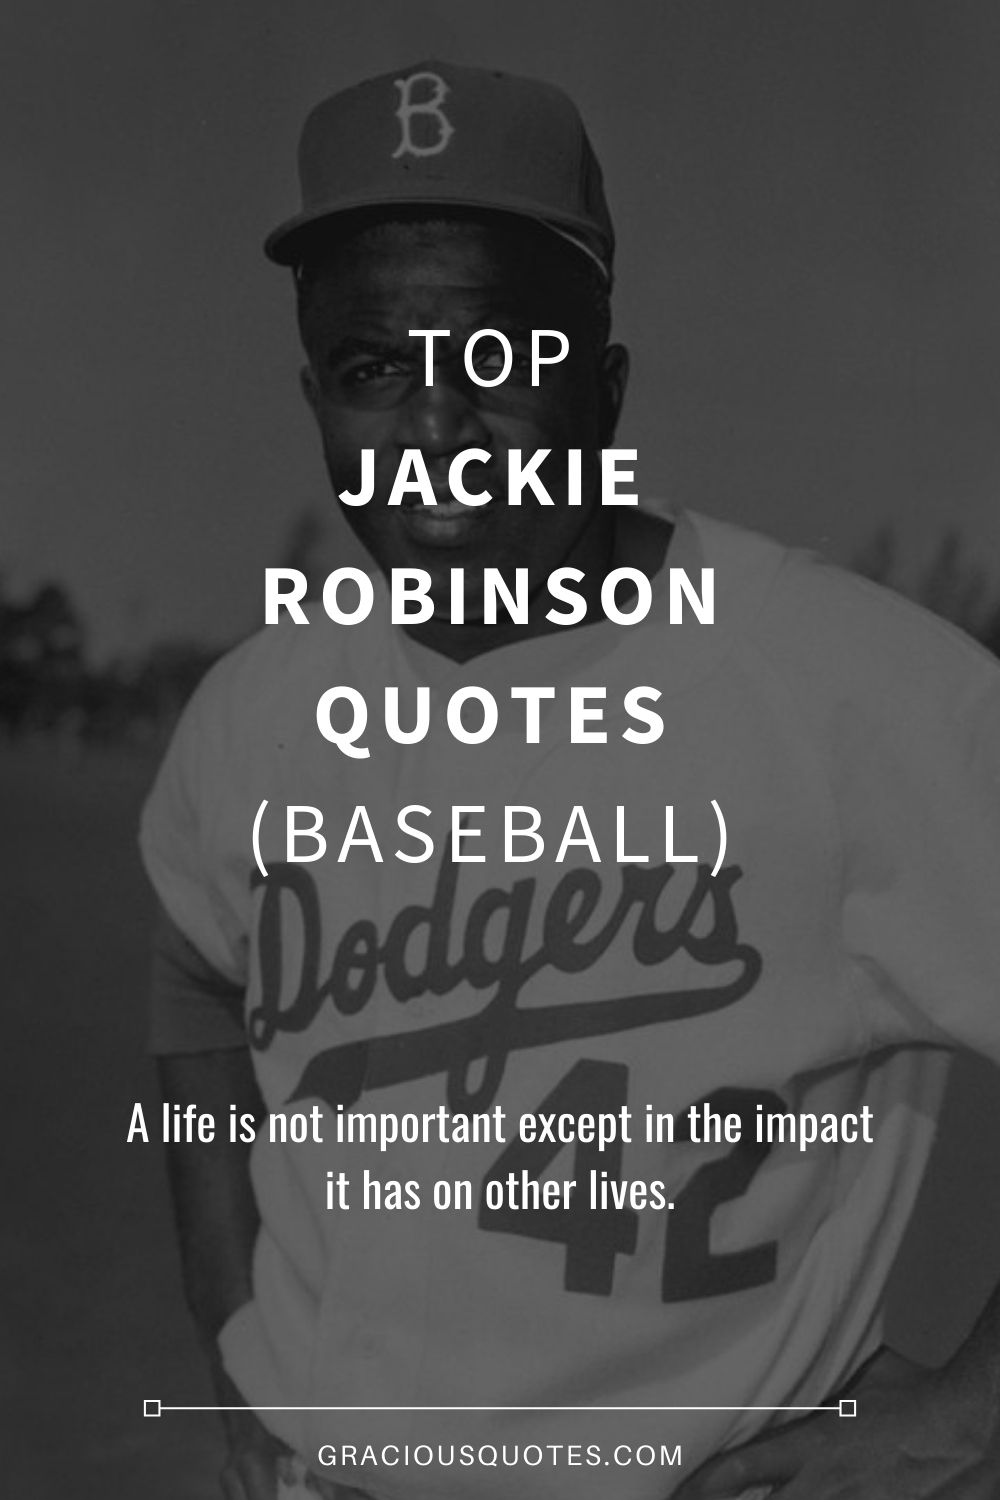 Jackie Robinson Quote: “The way I figured it, I was even with